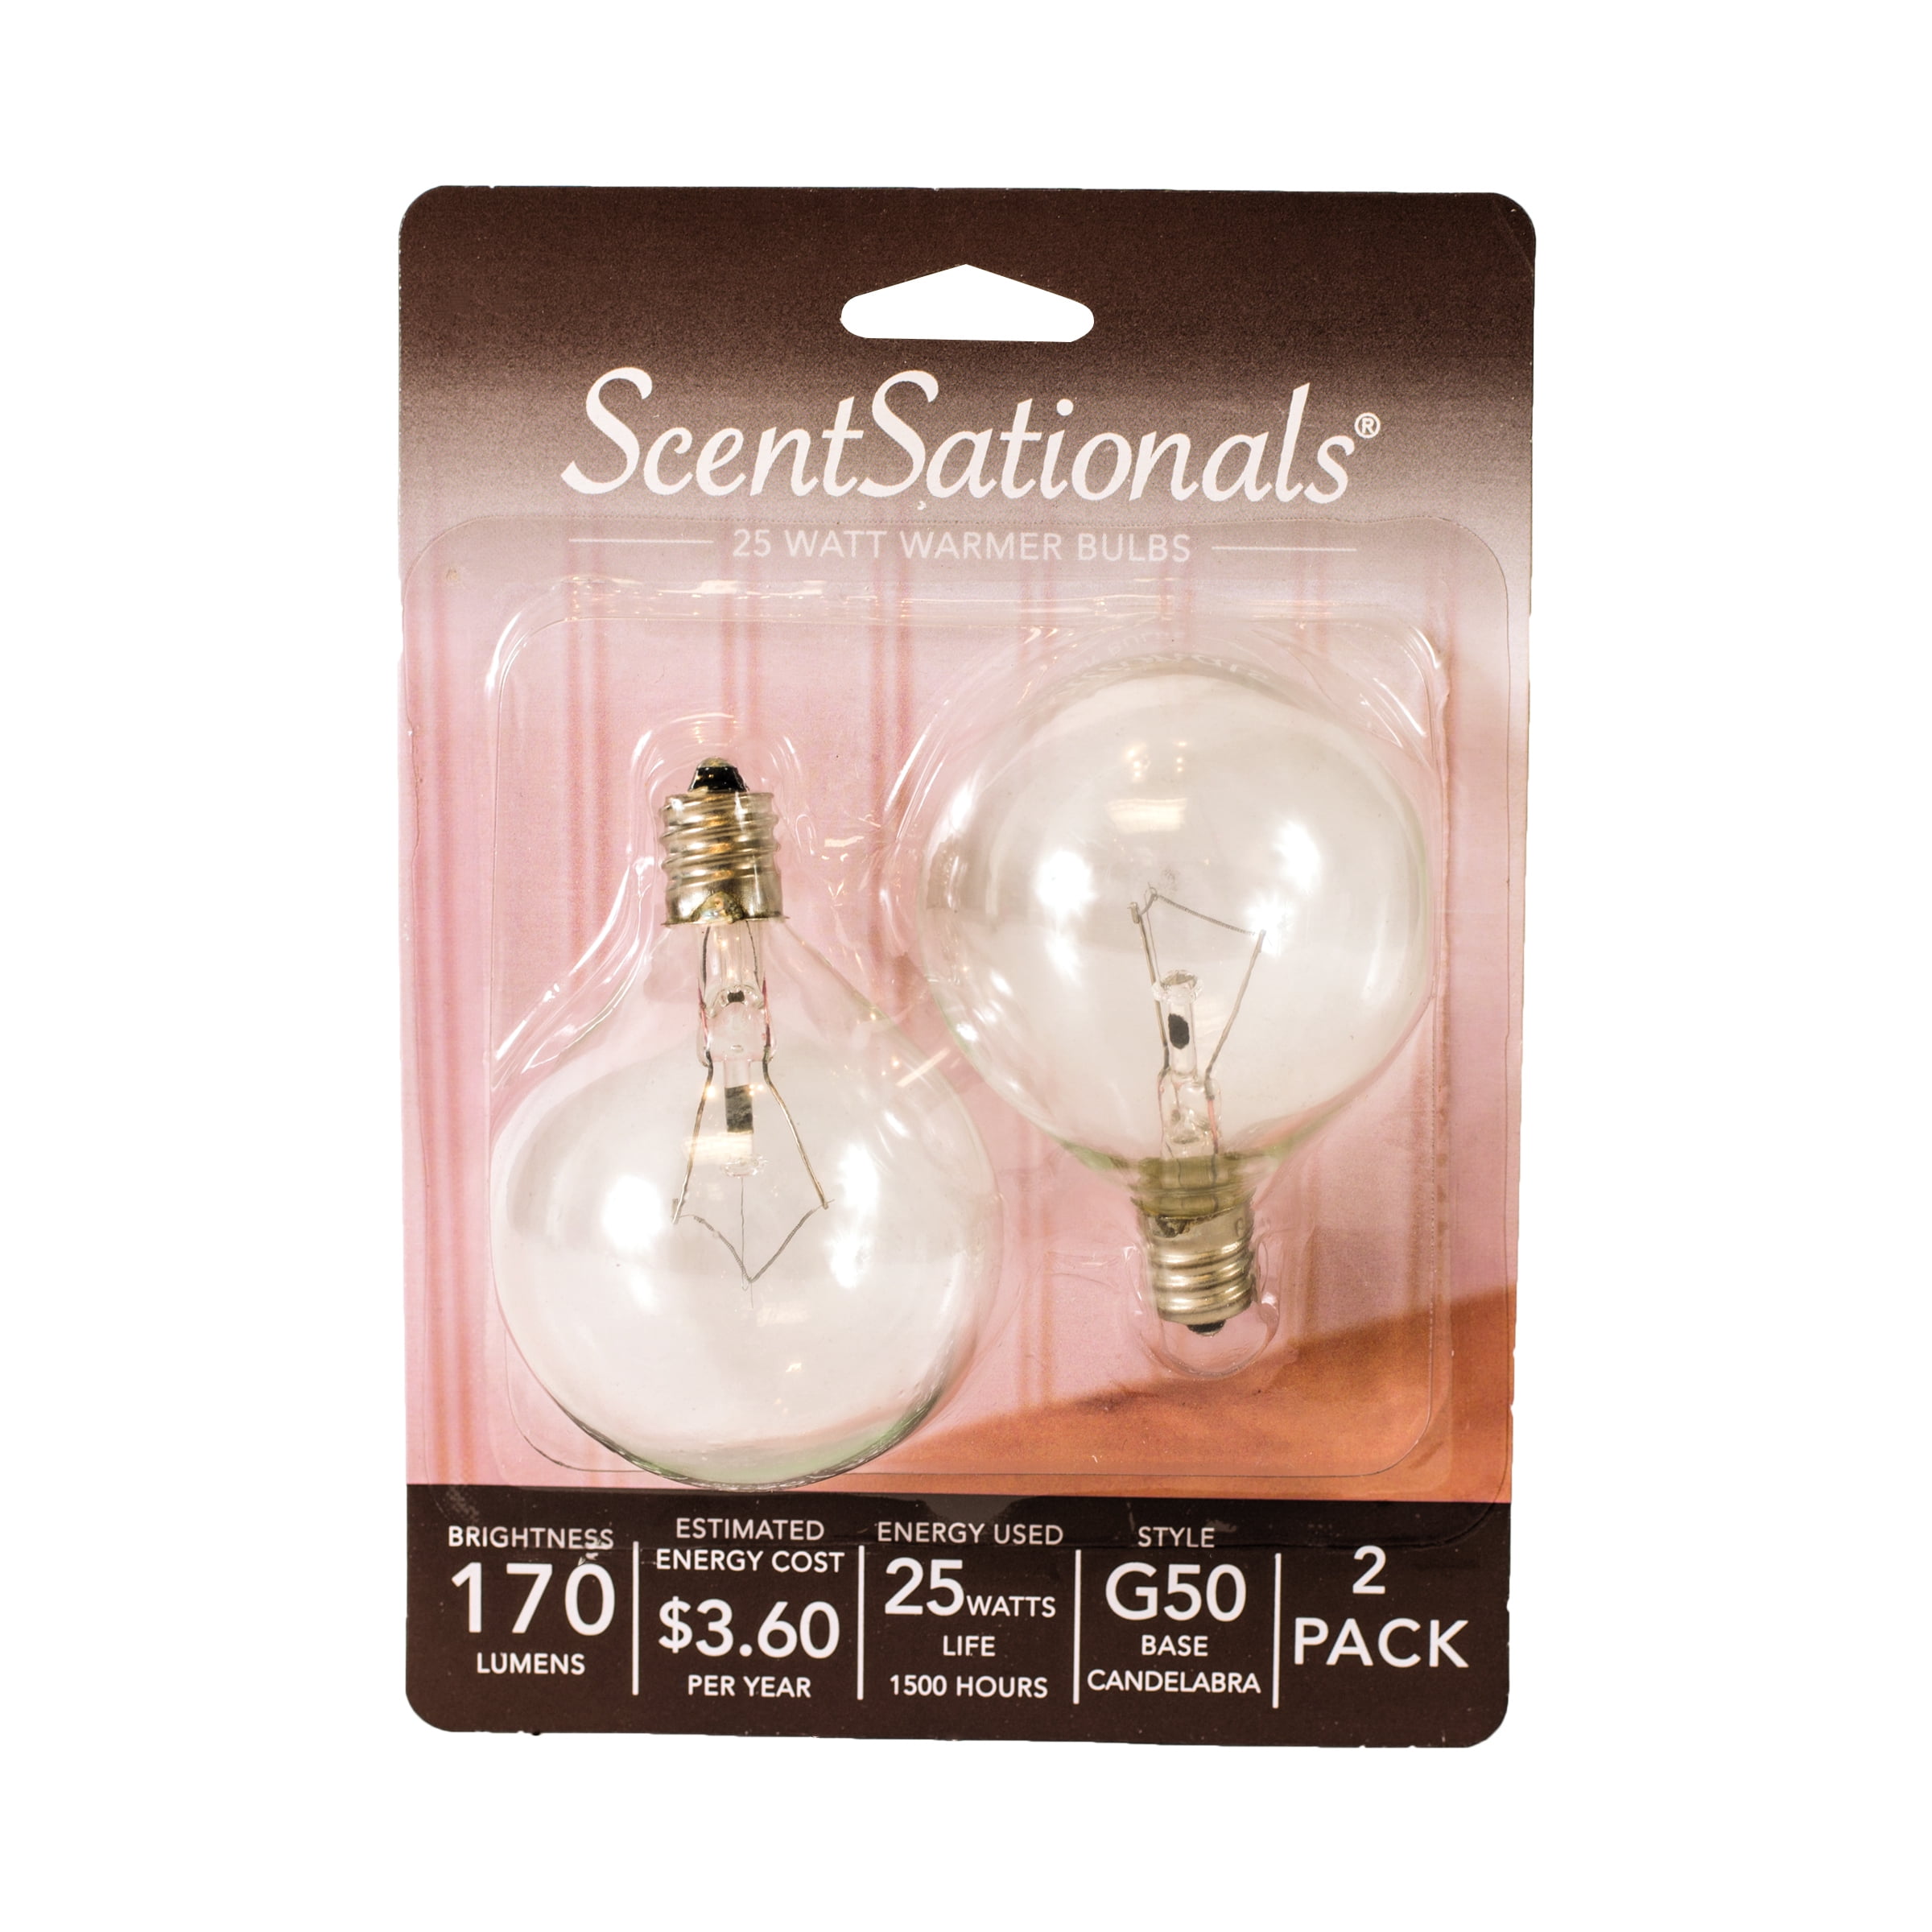 4 pack15 watt Light Bulbs Fits PLUG-IN Scentsy Warmers and Medical equipment 